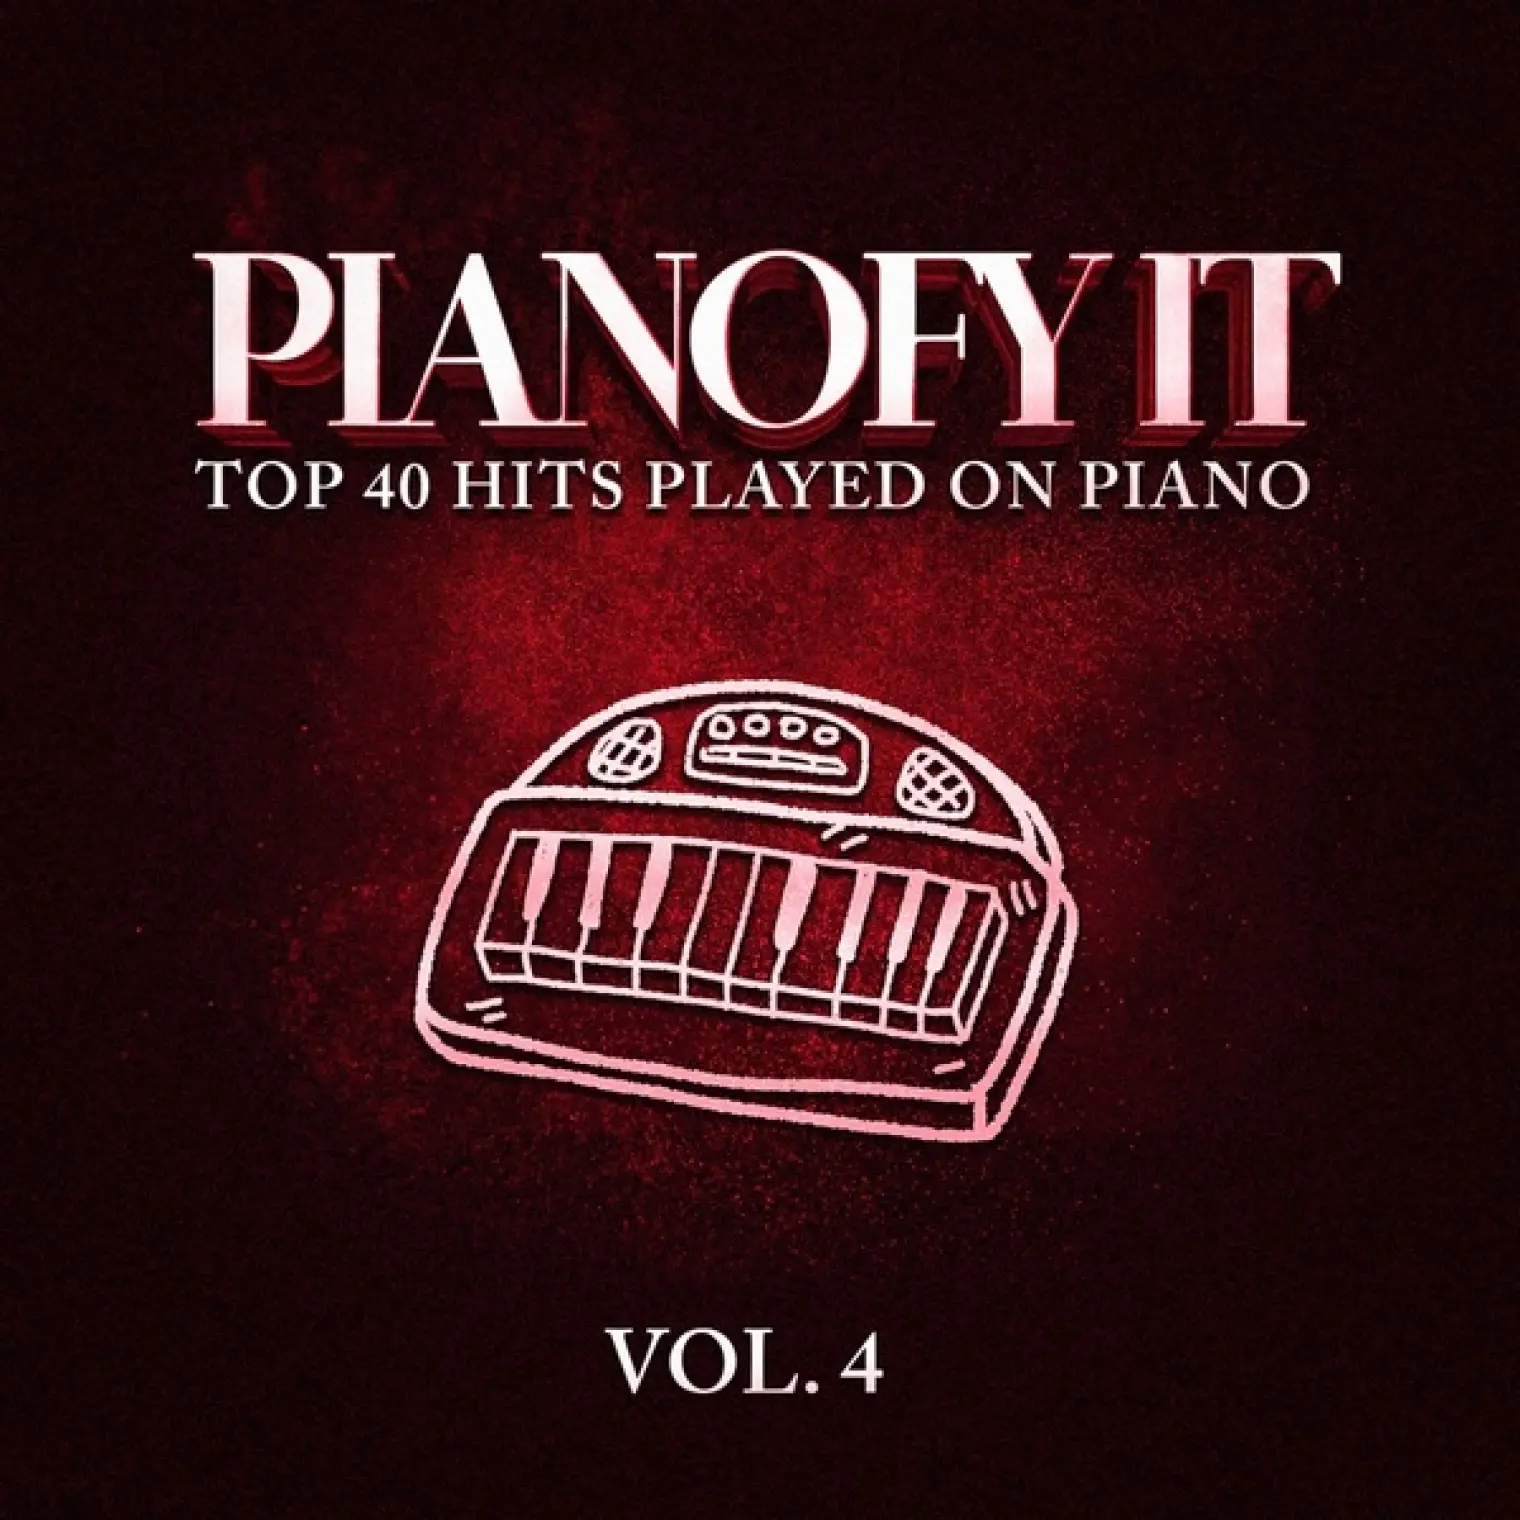 Pianofy It, Vol. 4 - Top 40 Hits Played On Piano -  Piano 